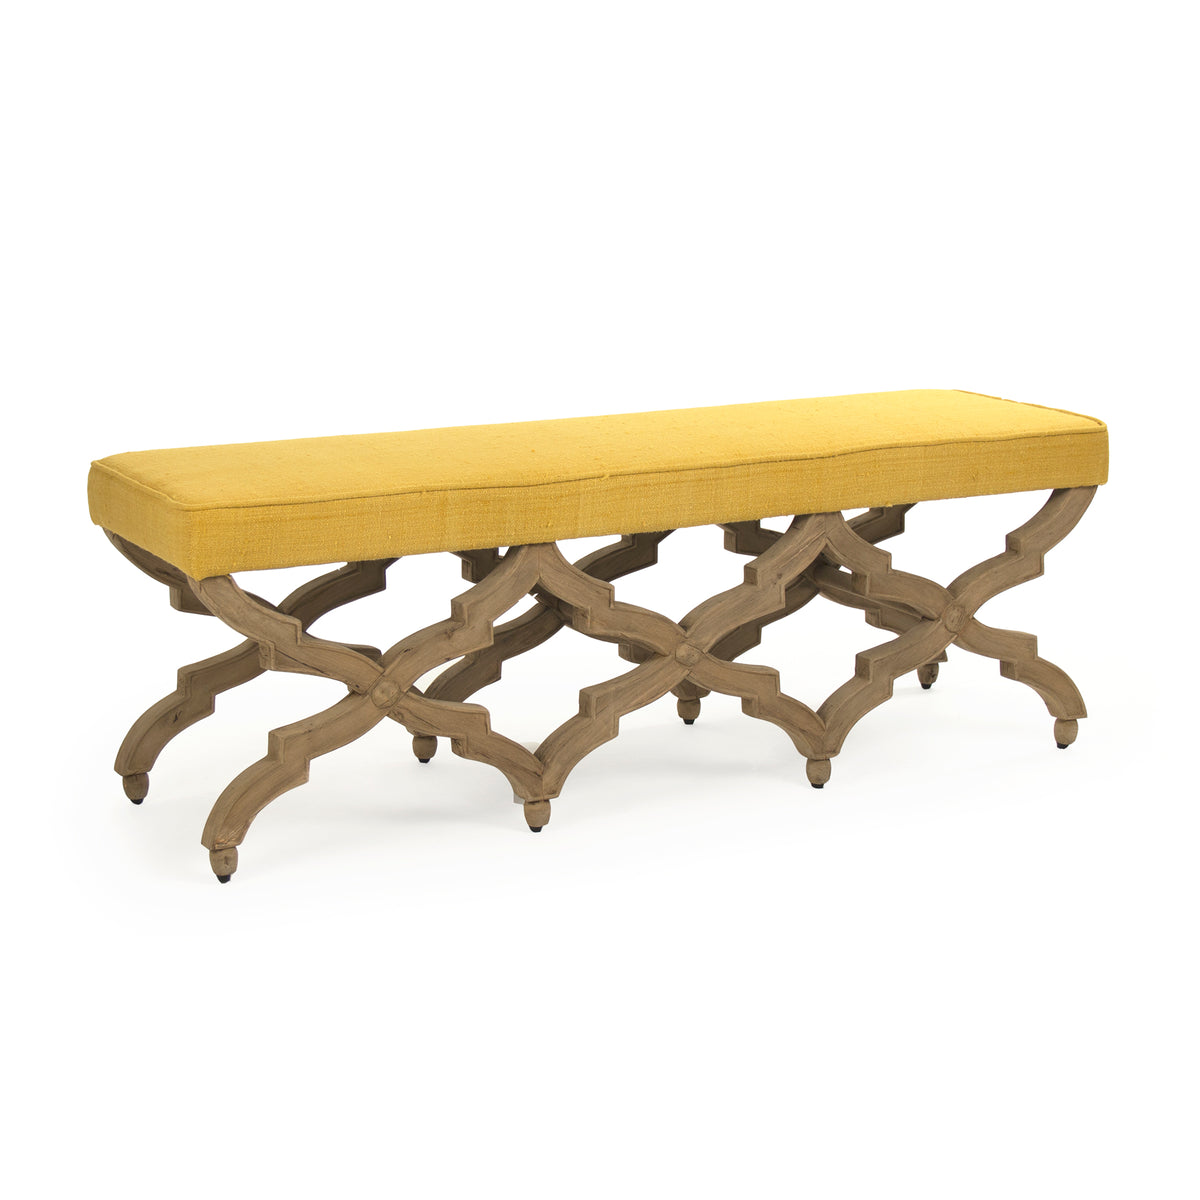 Judith Bench (Yellow) by Zentique